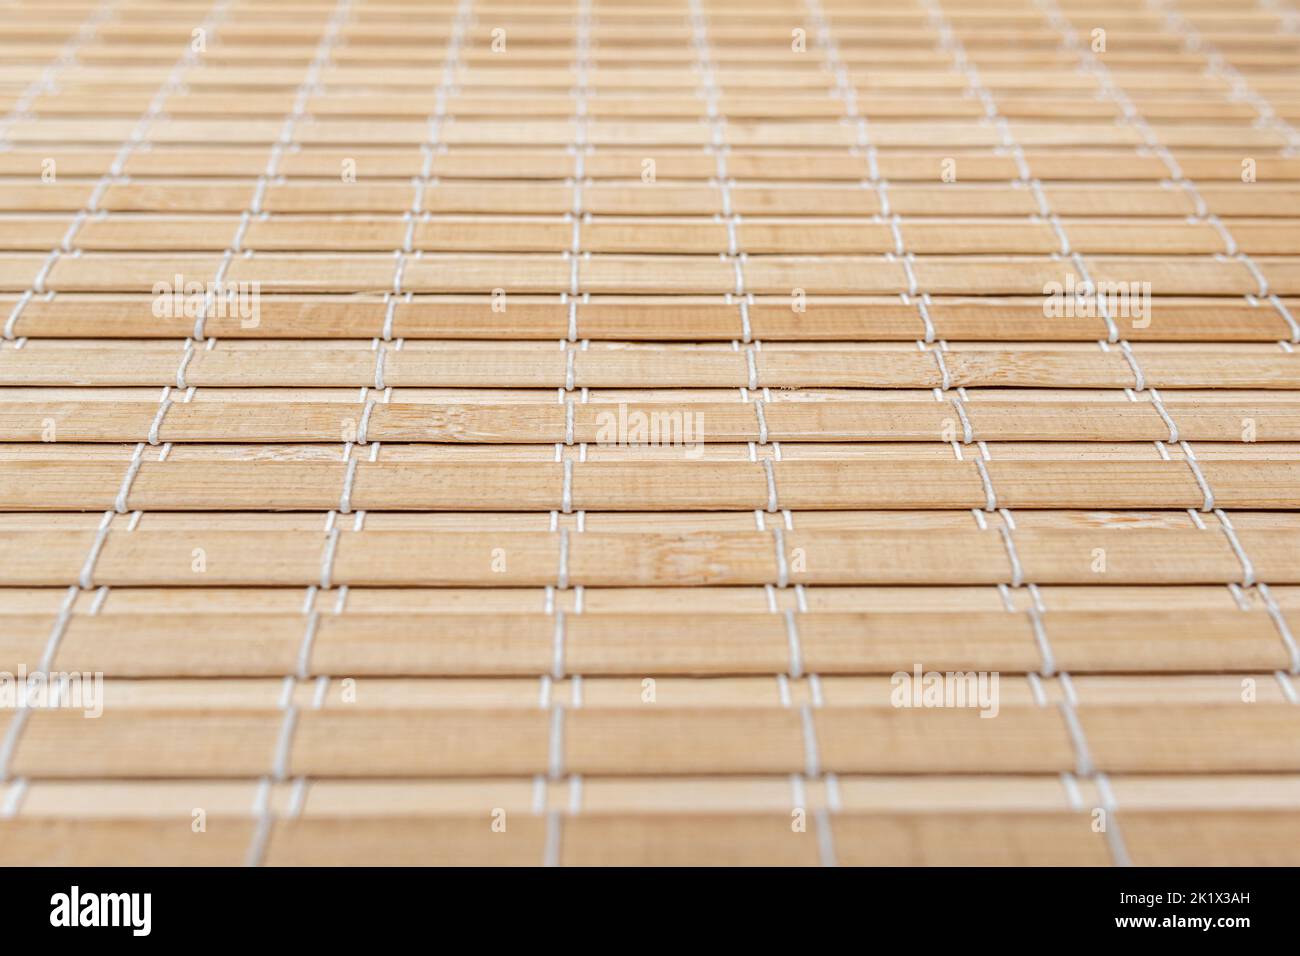 Bamboo wooden tablecloth for decor in the kitchen. Stock Photo